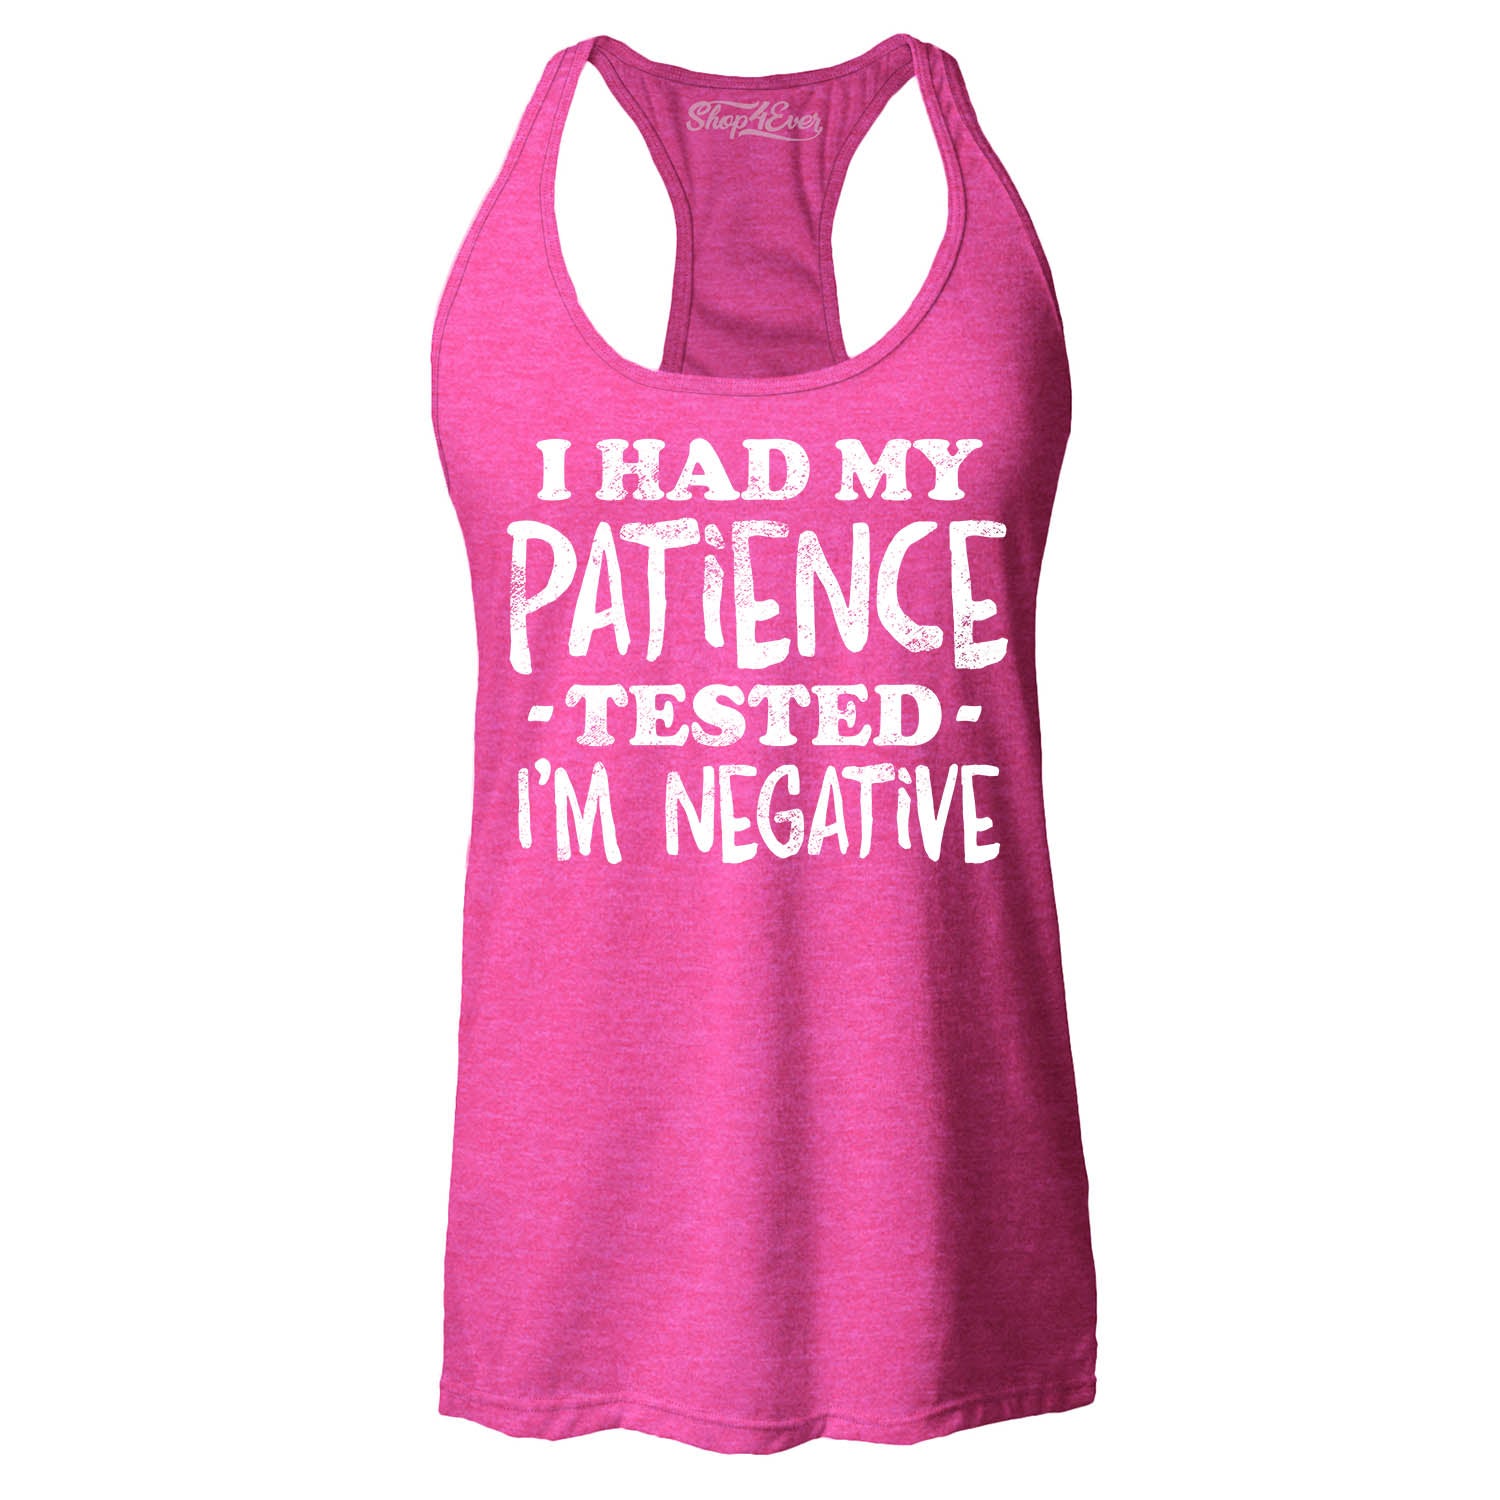 I Had My Patience Tested I'm Negative Women's Racerback Tank Top Slim Fit